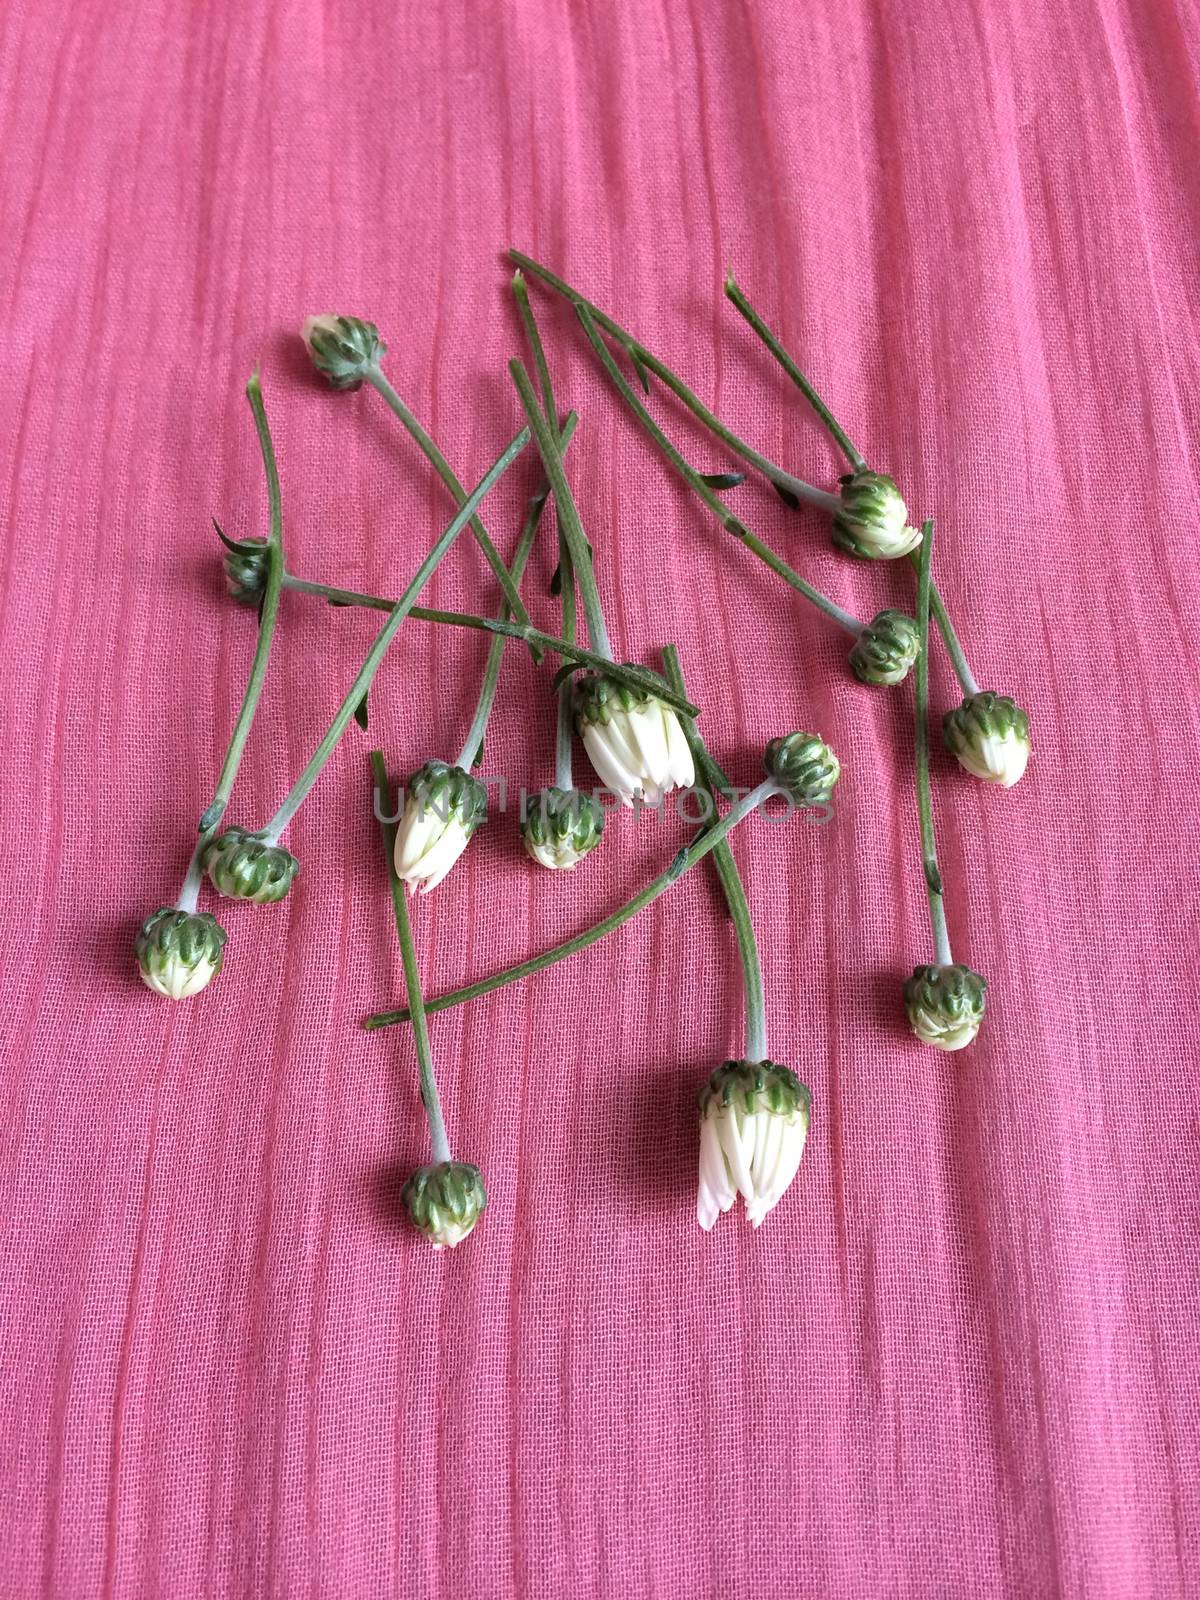 Cut white daisy buds on a pink colored background